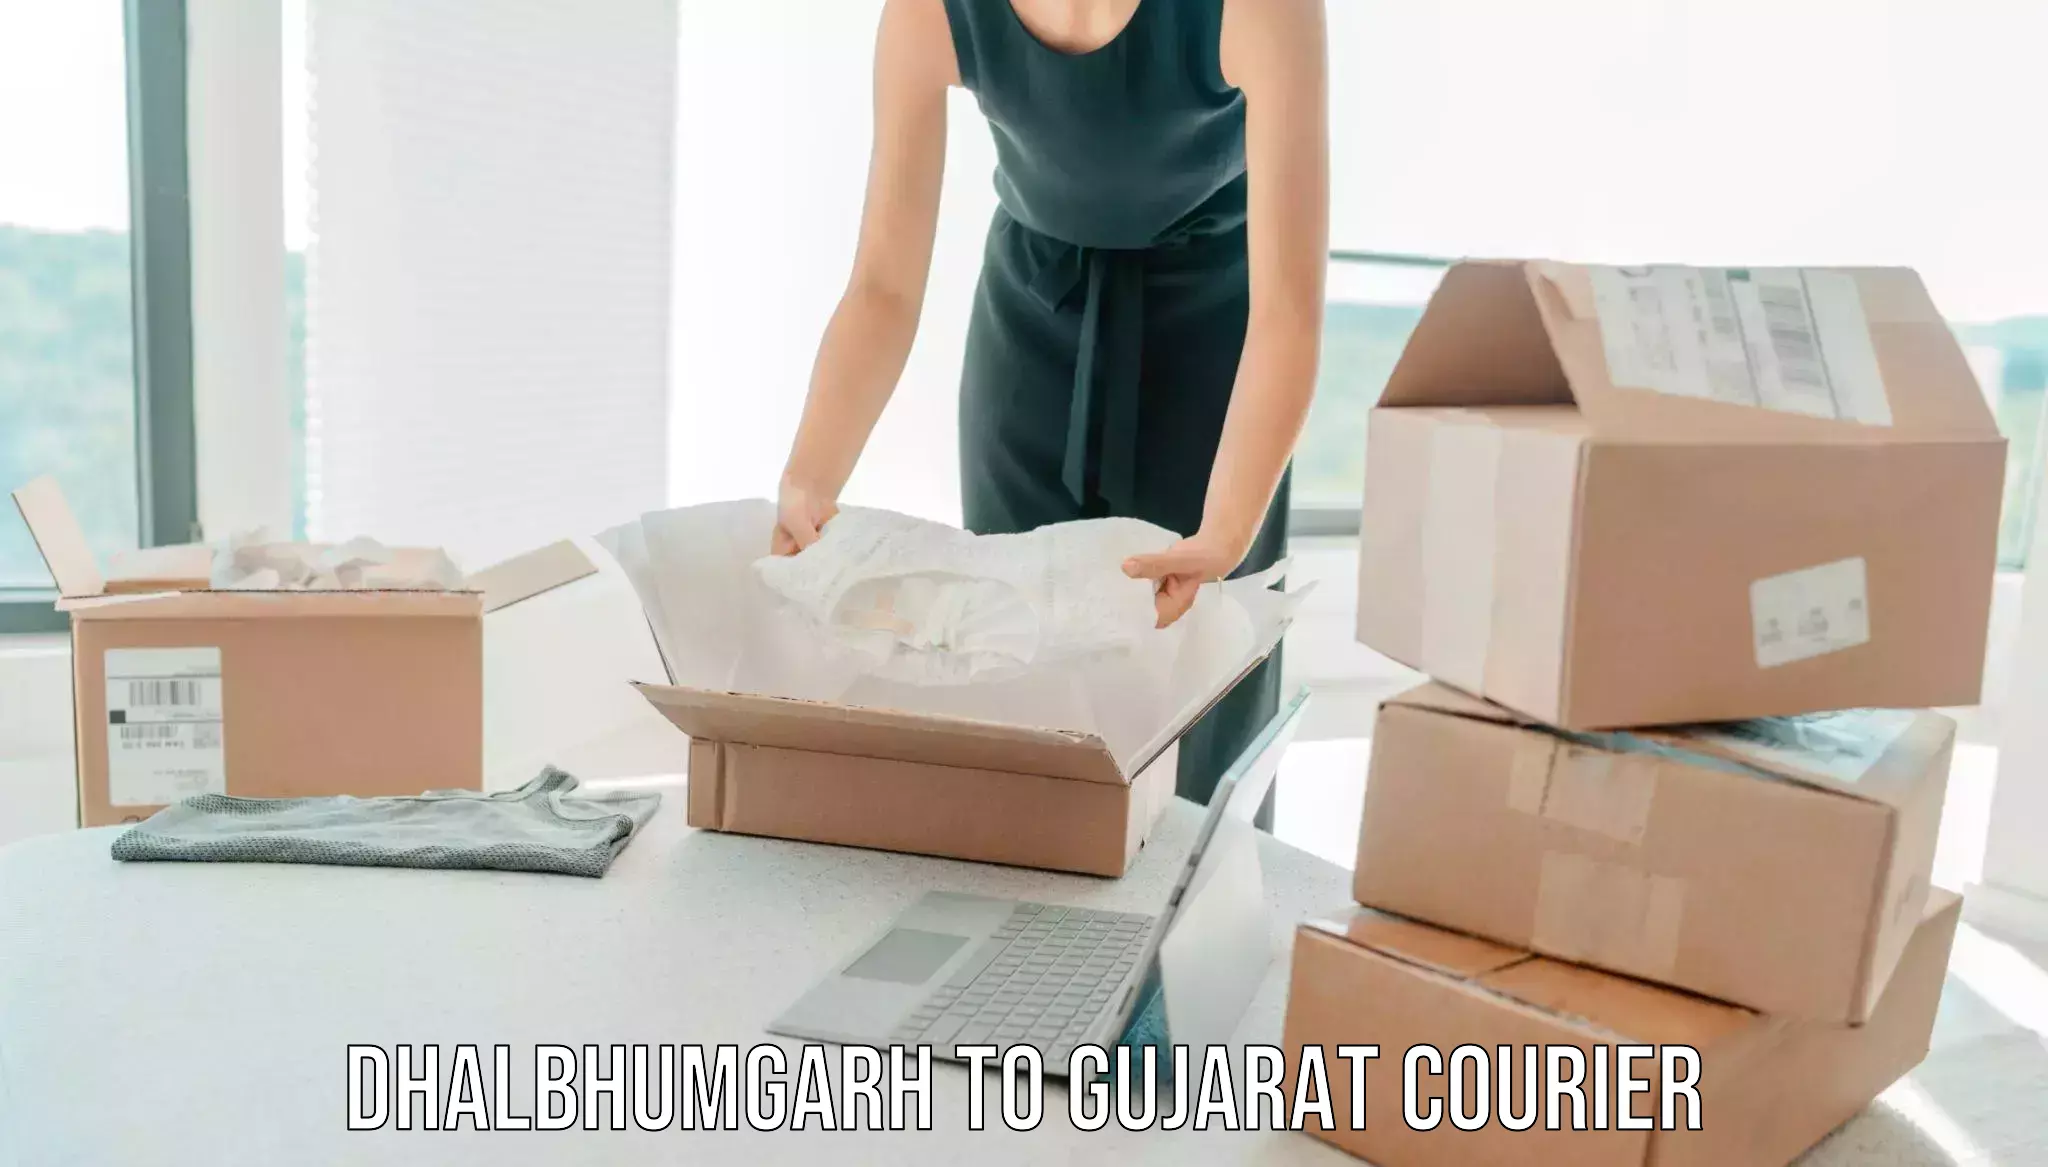 Reliable relocation services Dhalbhumgarh to Kalavad